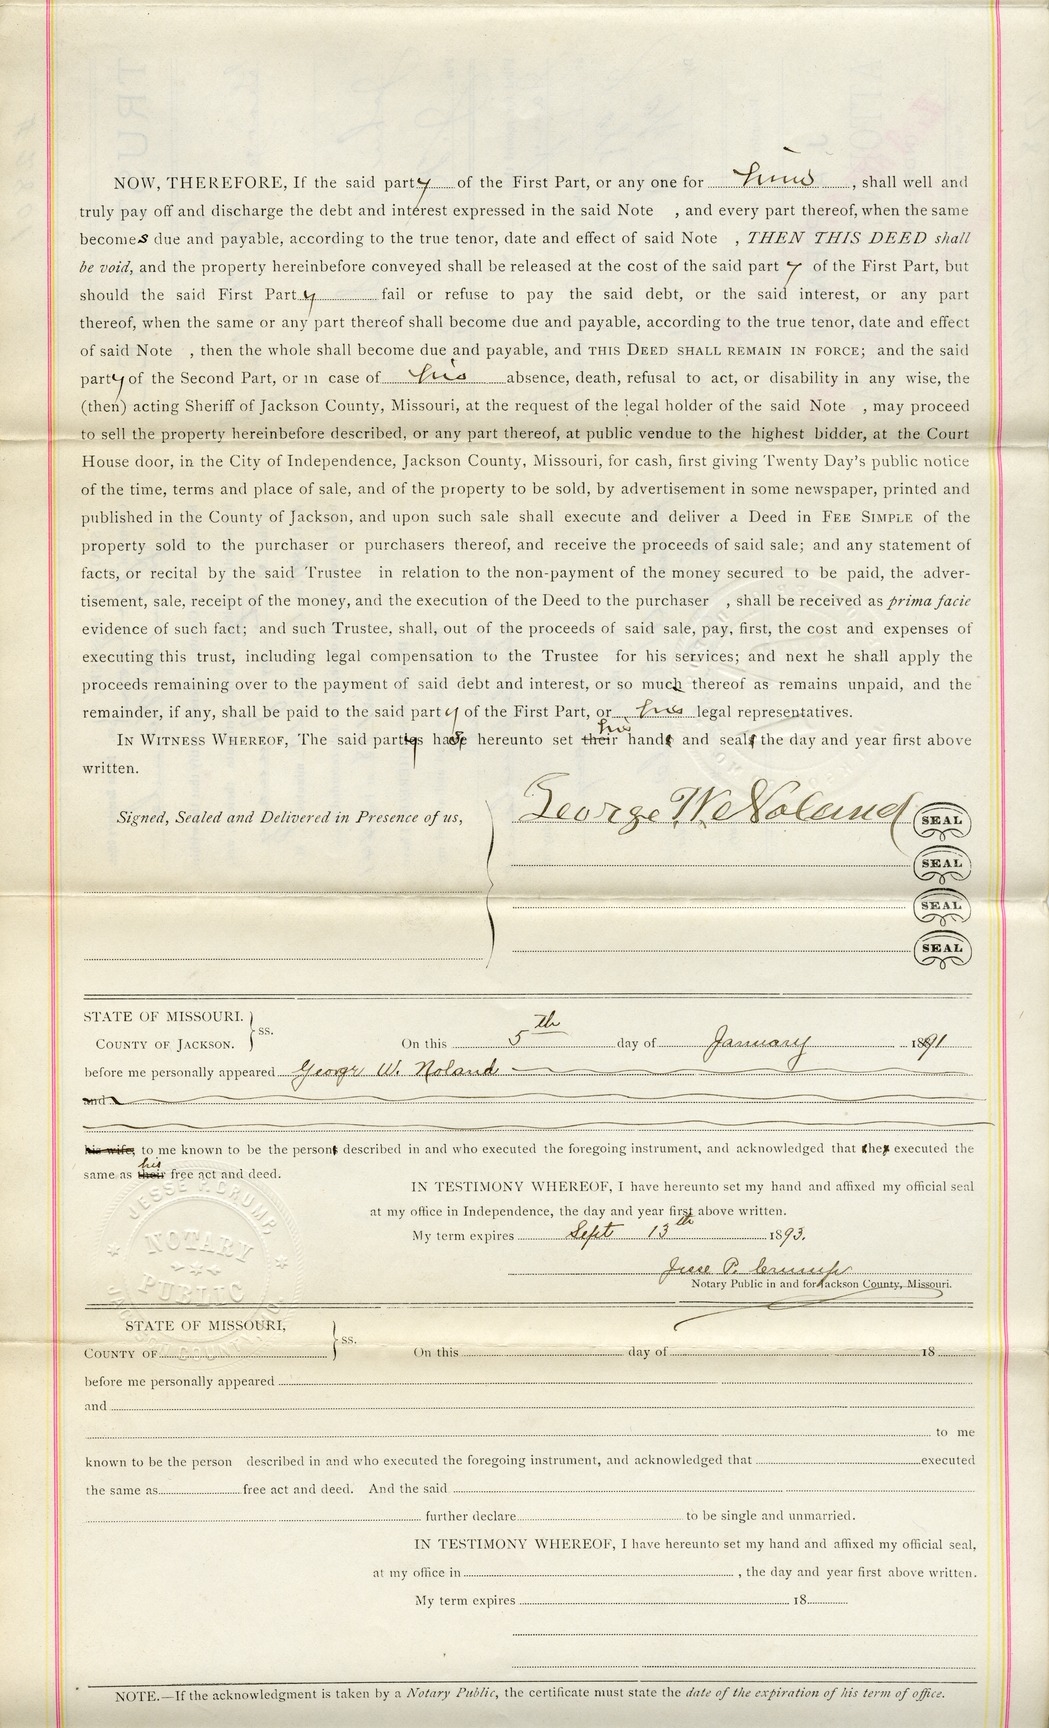 Trust Deed from George W. Noland to John A. Sea for J. H. Slover